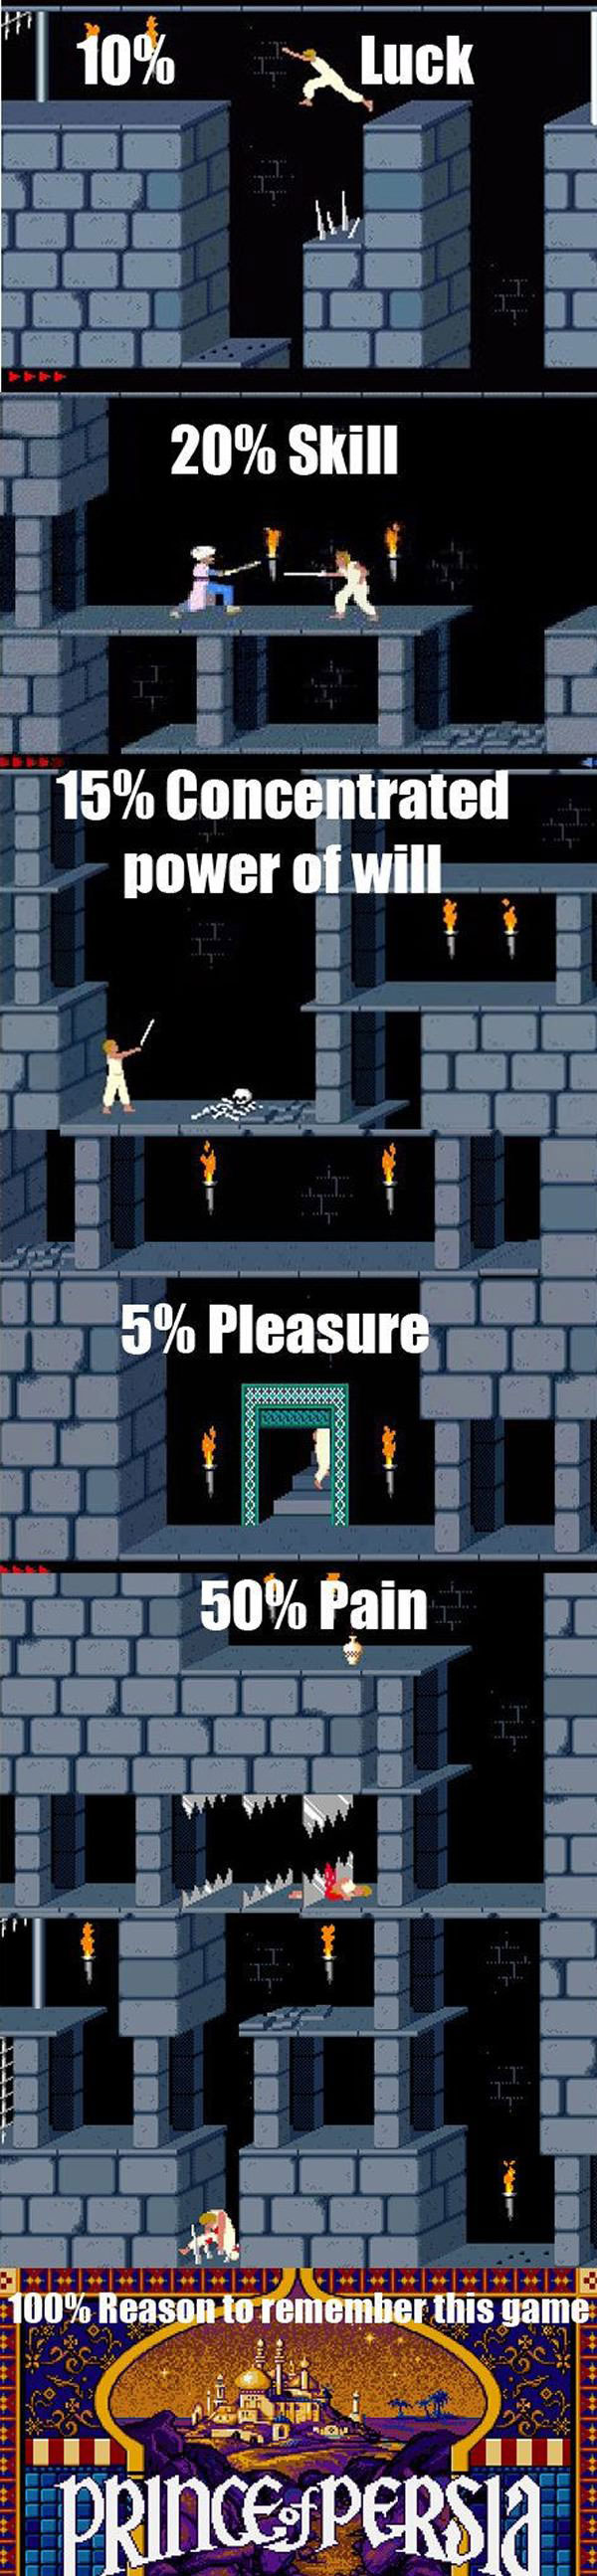 prince of persia, 100% reason to remember this game